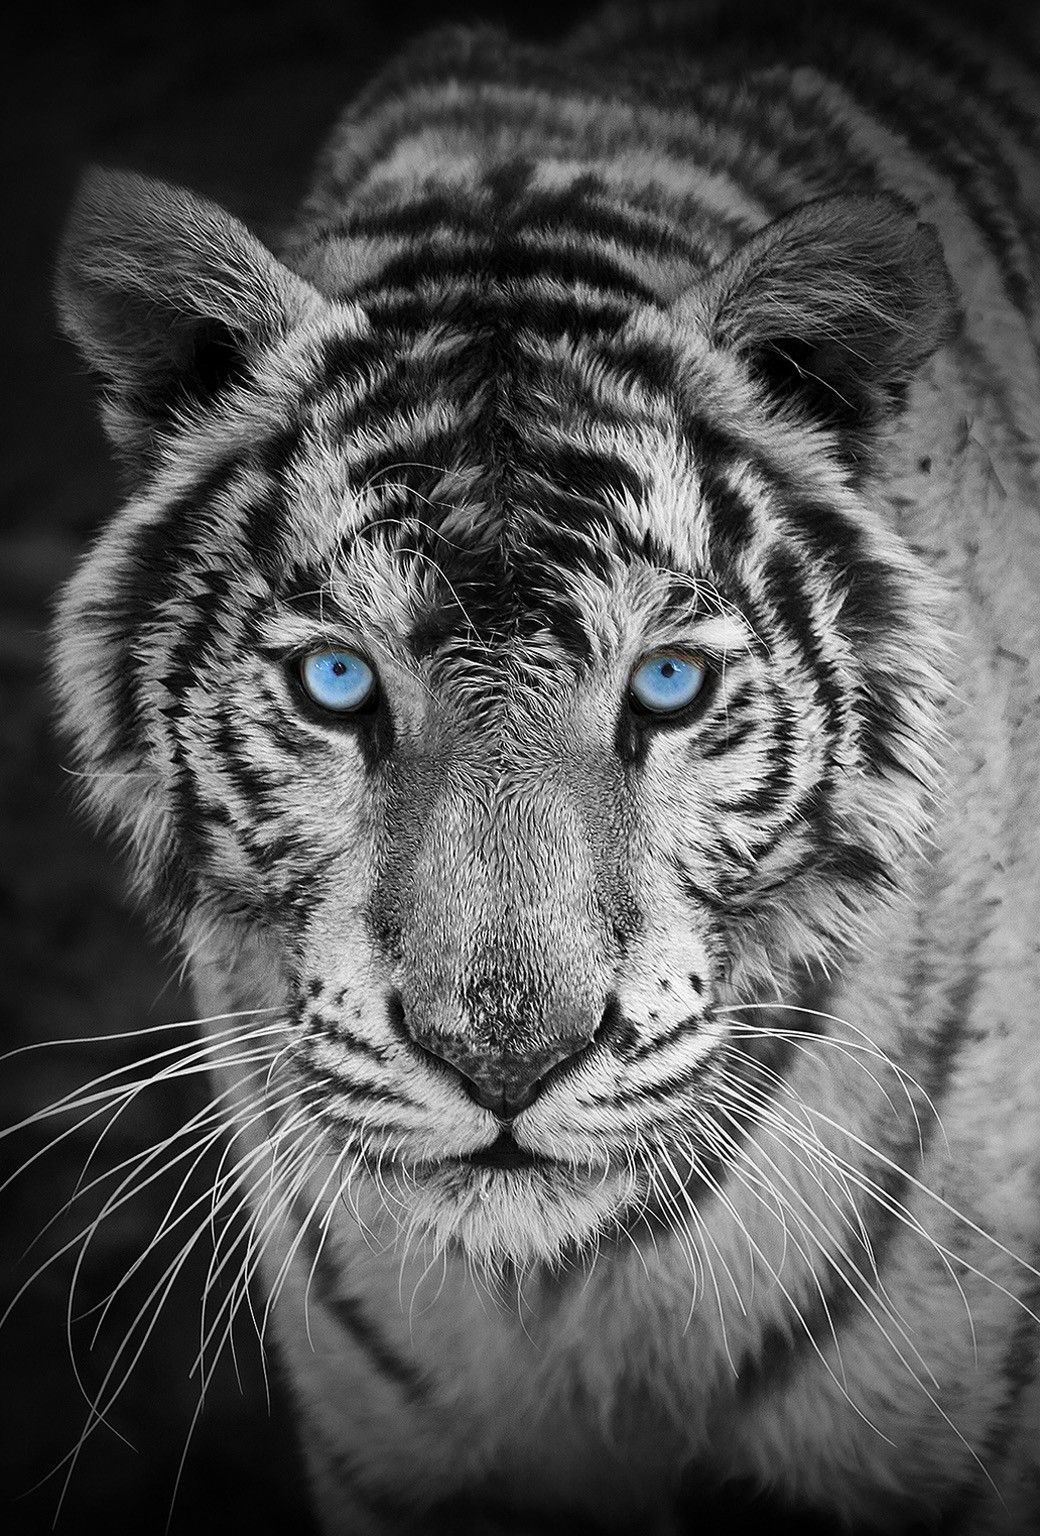 10 Wild Animals Wallpapers For The Iphone 6 - White Tiger Wallpaper Iphone - HD Wallpaper 